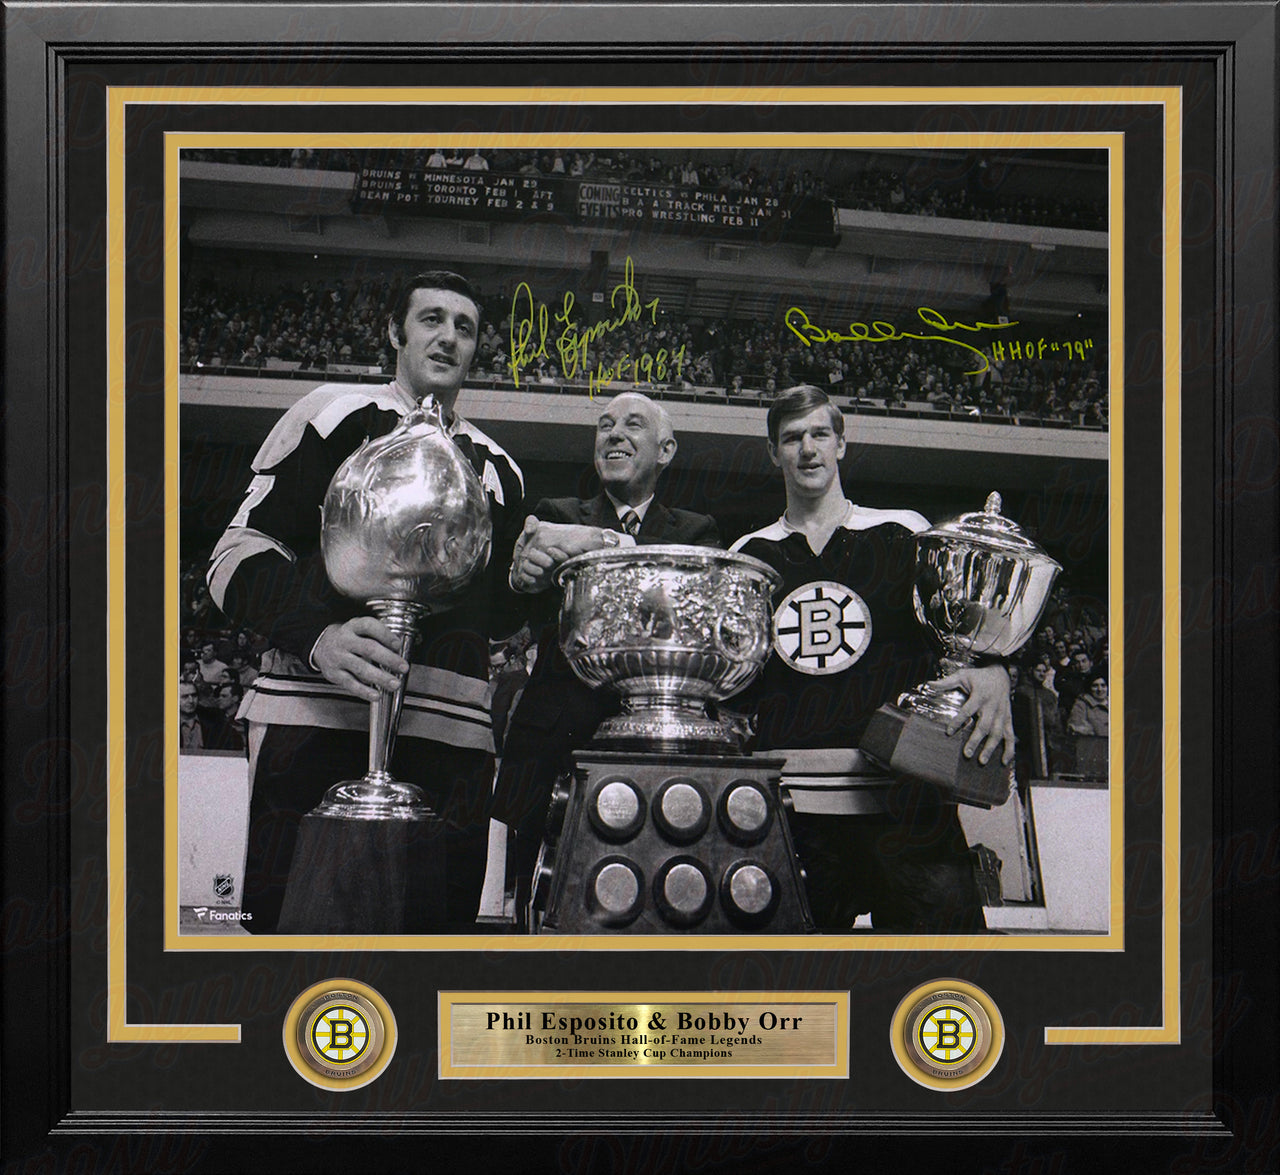 Bobby Orr & Phil Esposito Trophies Boston Bruins Autographed 16" x 20" Framed Hockey Photo